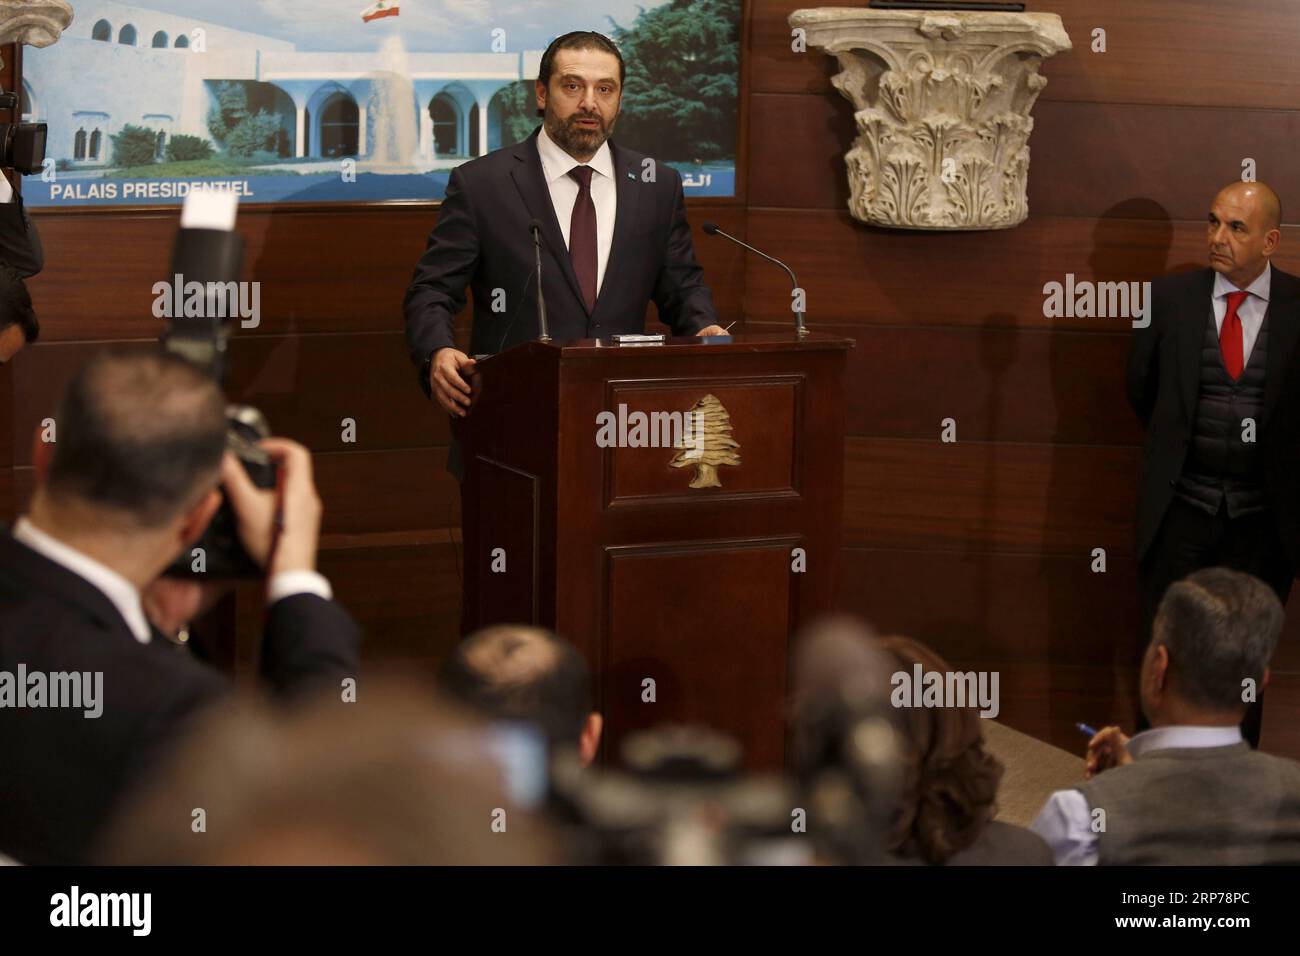 190131 -- BEIRUT, Jan. 31, 2019 -- Lebanese Prime Minister Saad Hariri C speaks at a press conference in Beirut, Lebanon, Jan. 31, 2019. Lebanon announced Thursday the formation of a new government, which is headed by Prime Minister Saad Hariri, breaking a nine-month political deadlock in the country, local TV Channel LBCI reported.  LEBANON-BEIRUT-PM-NEW GOVERNMENT BilalxJawich PUBLICATIONxNOTxINxCHN Stock Photo